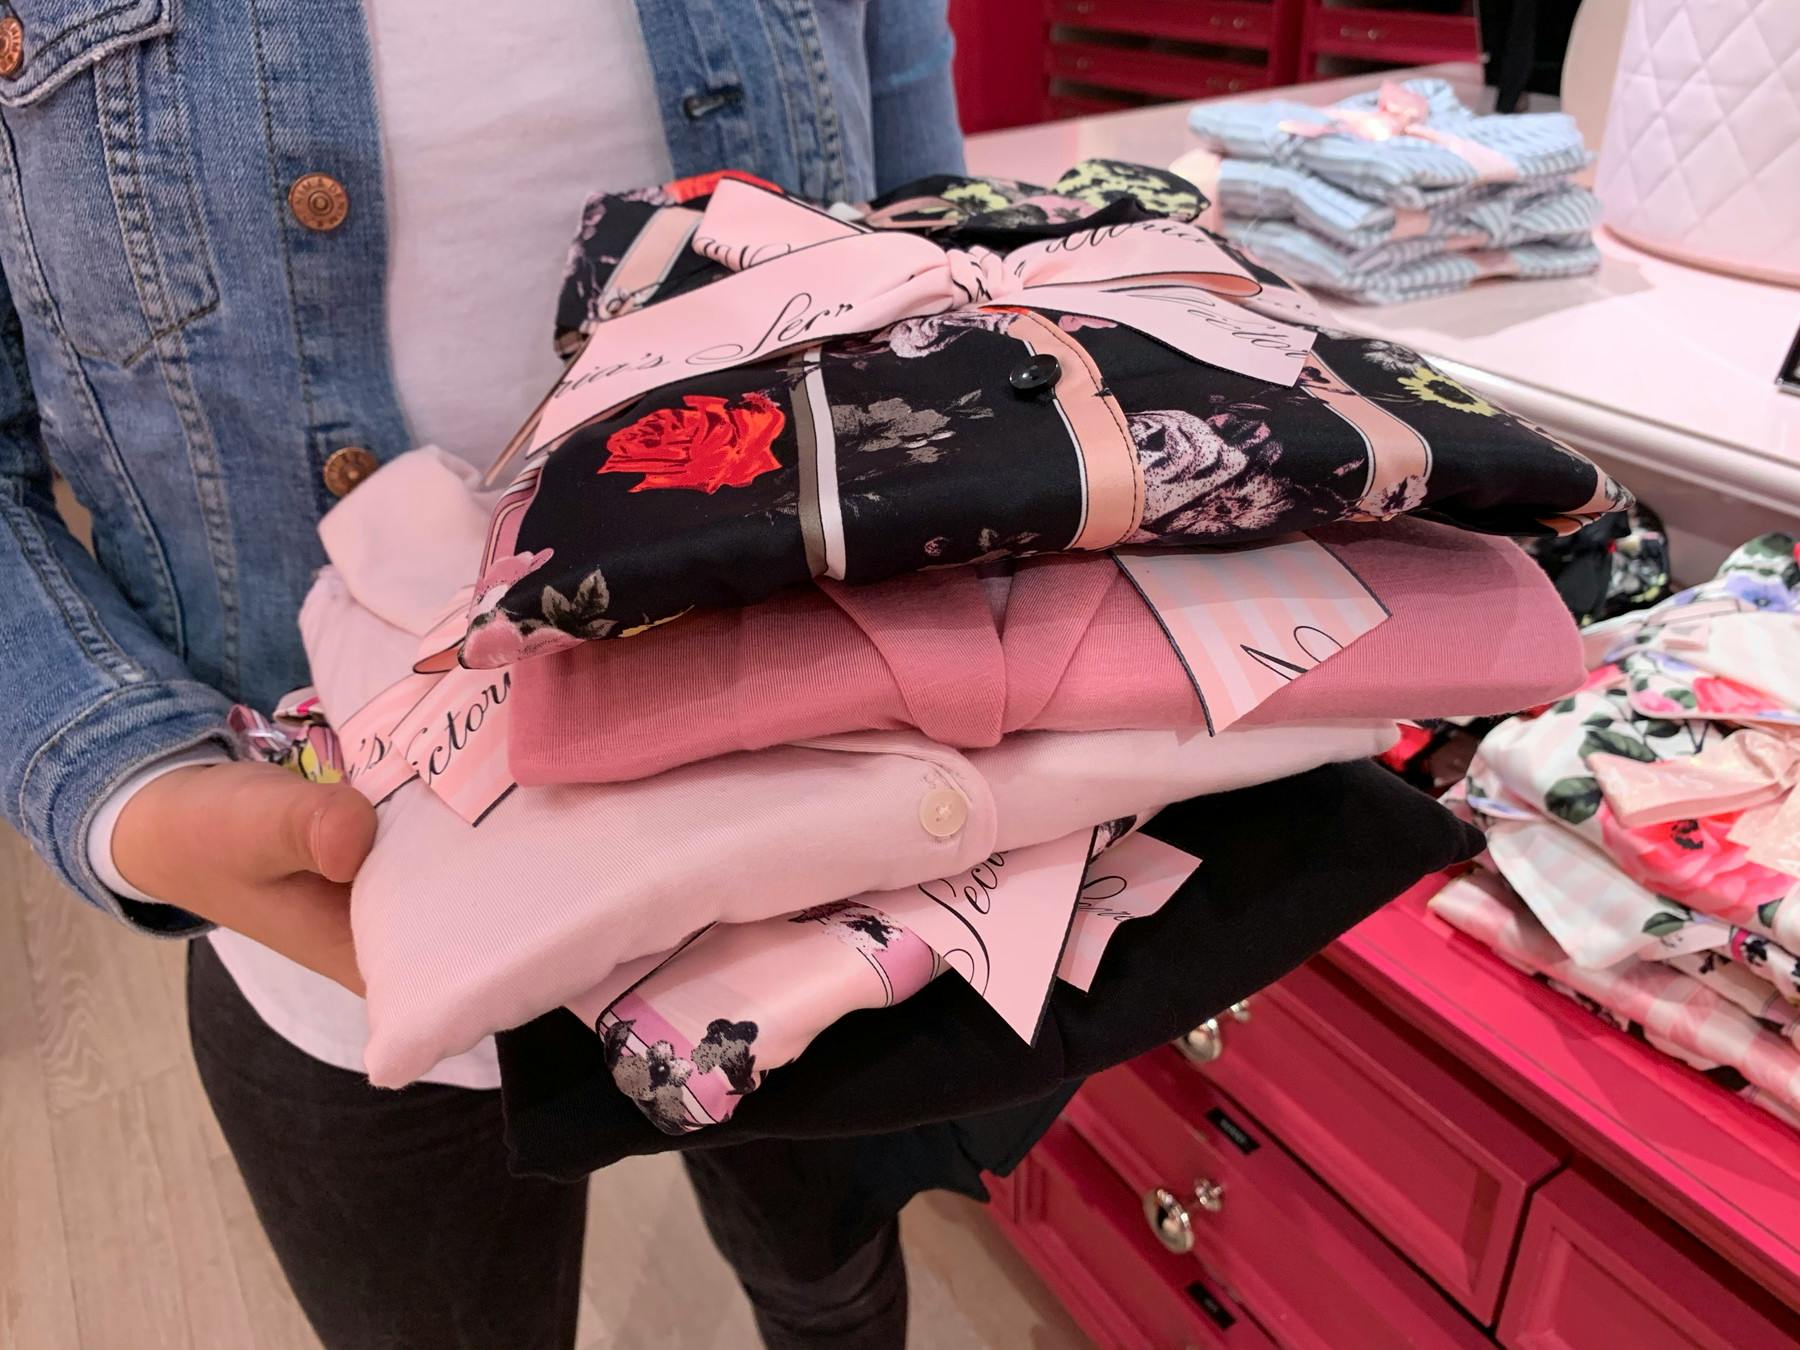 A person holding a stack of pajama sets Victoria's Secret